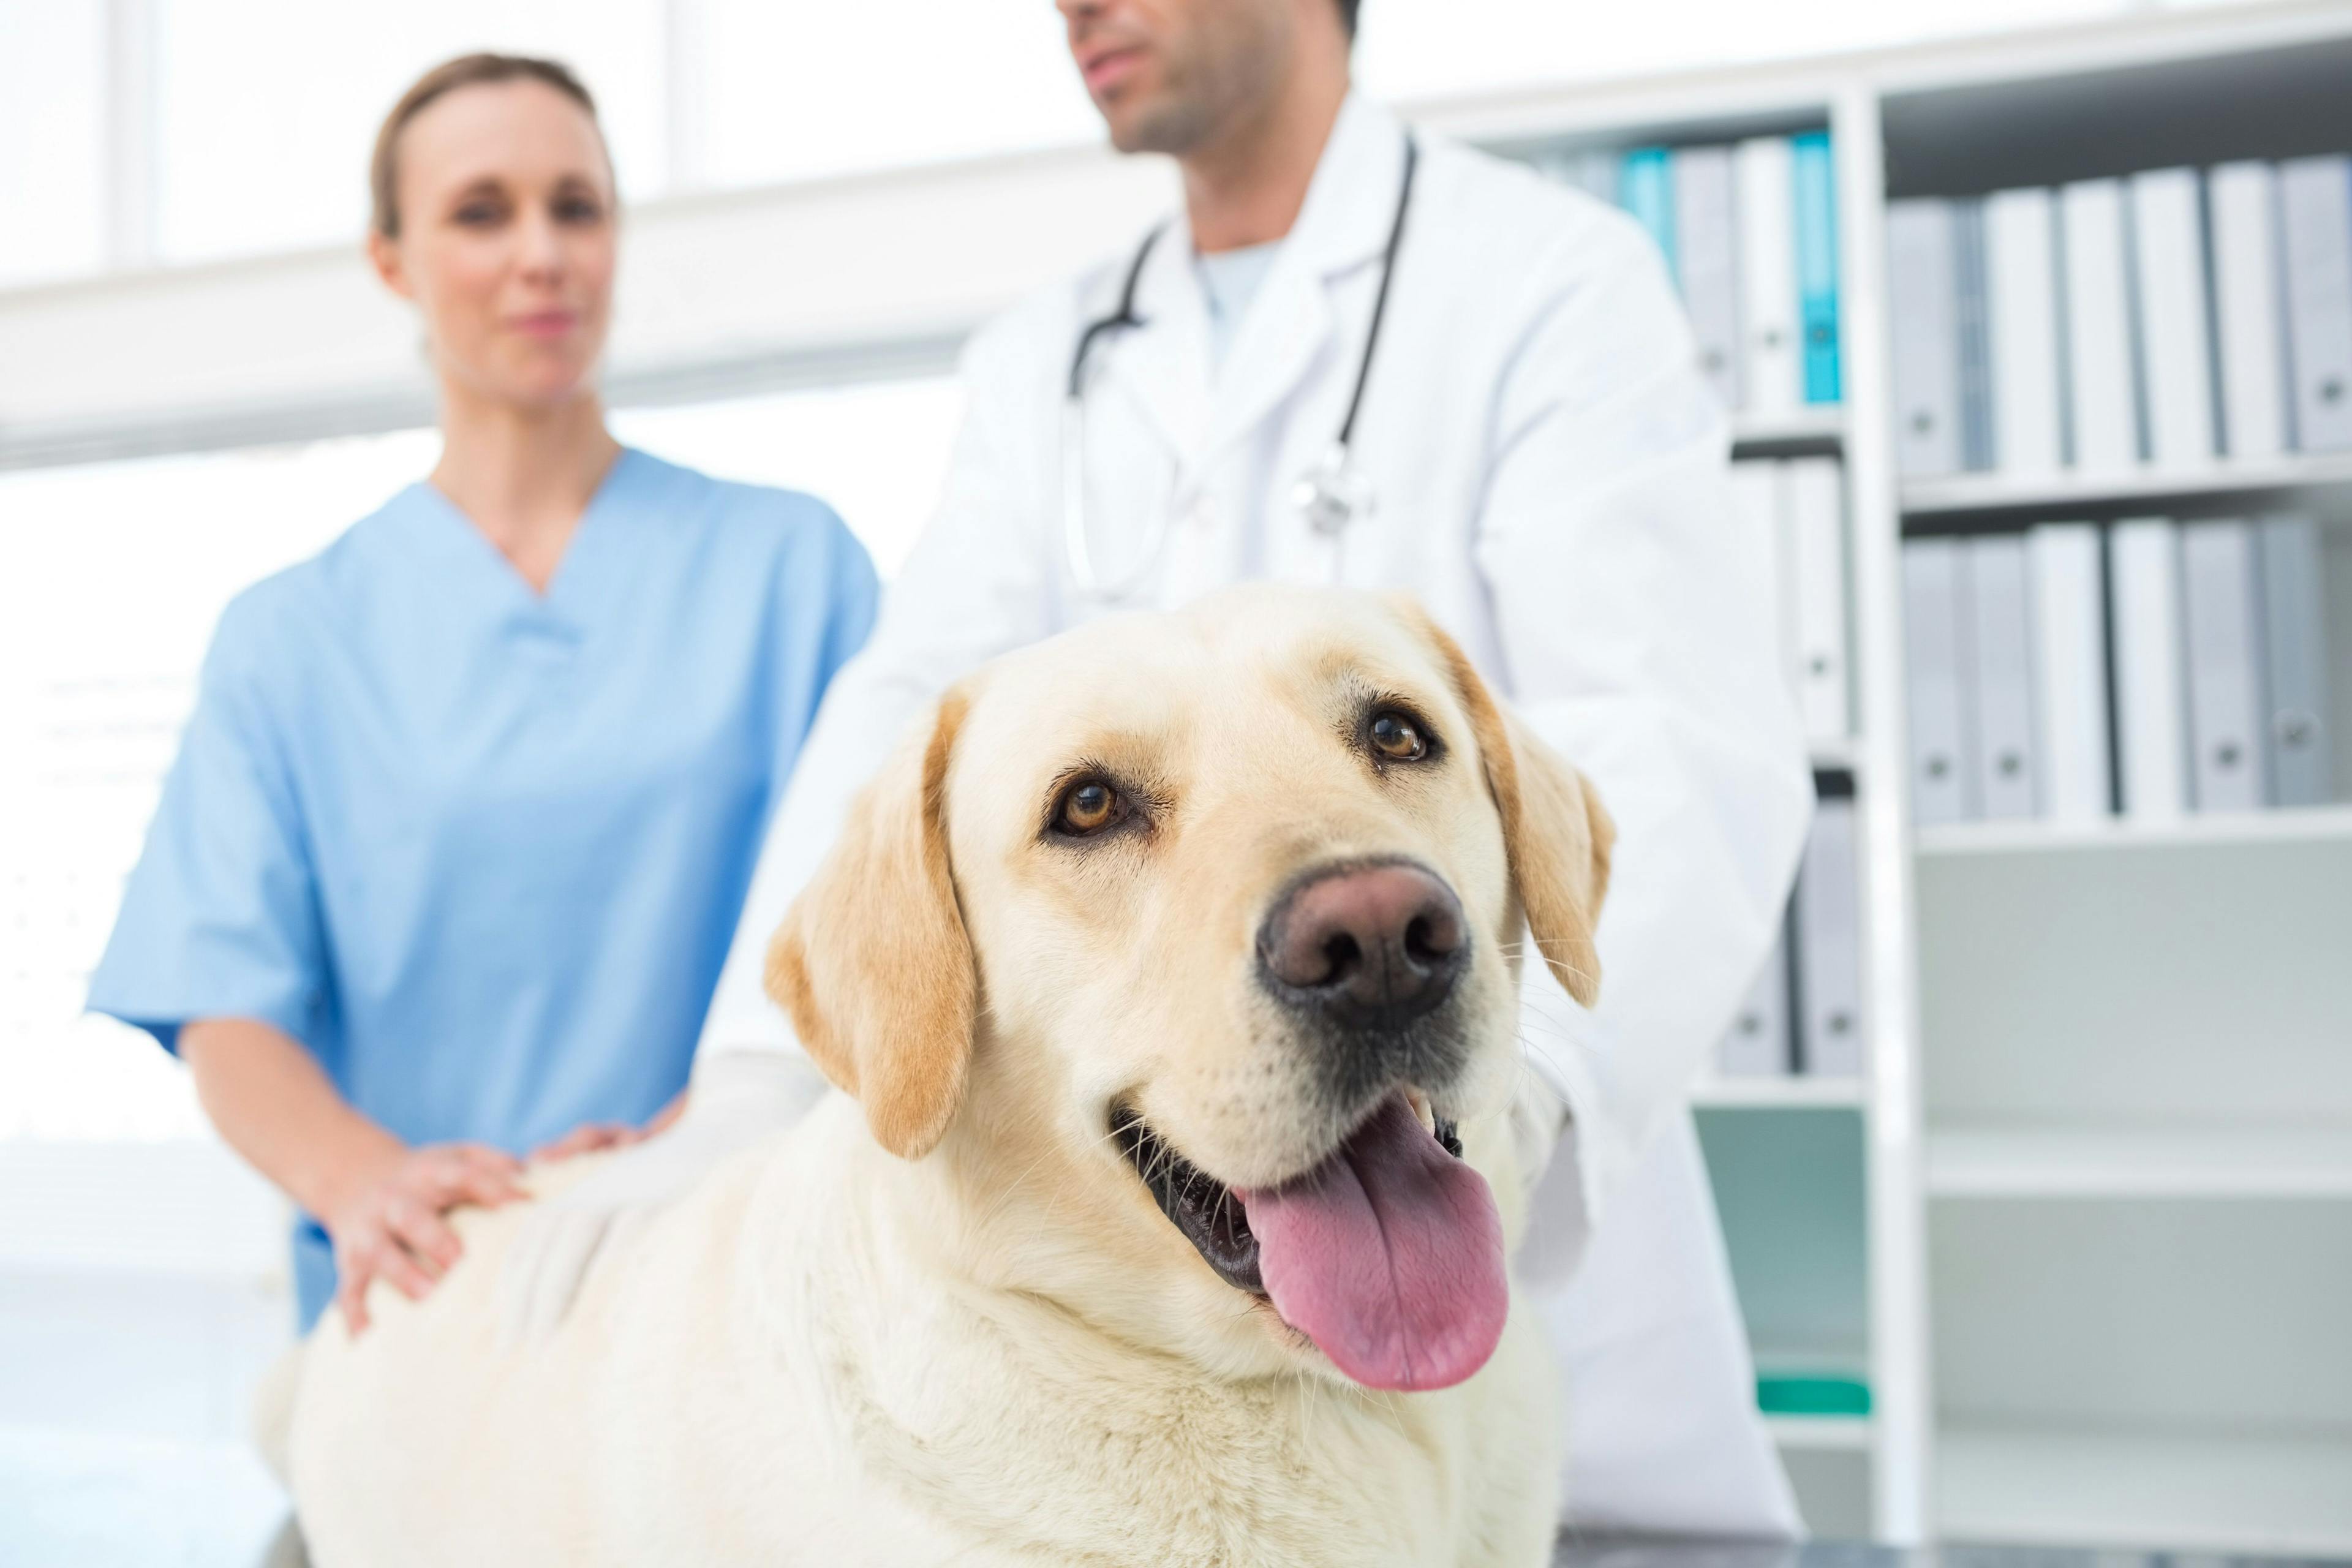 FDA makes decision for tissue-based canine product 